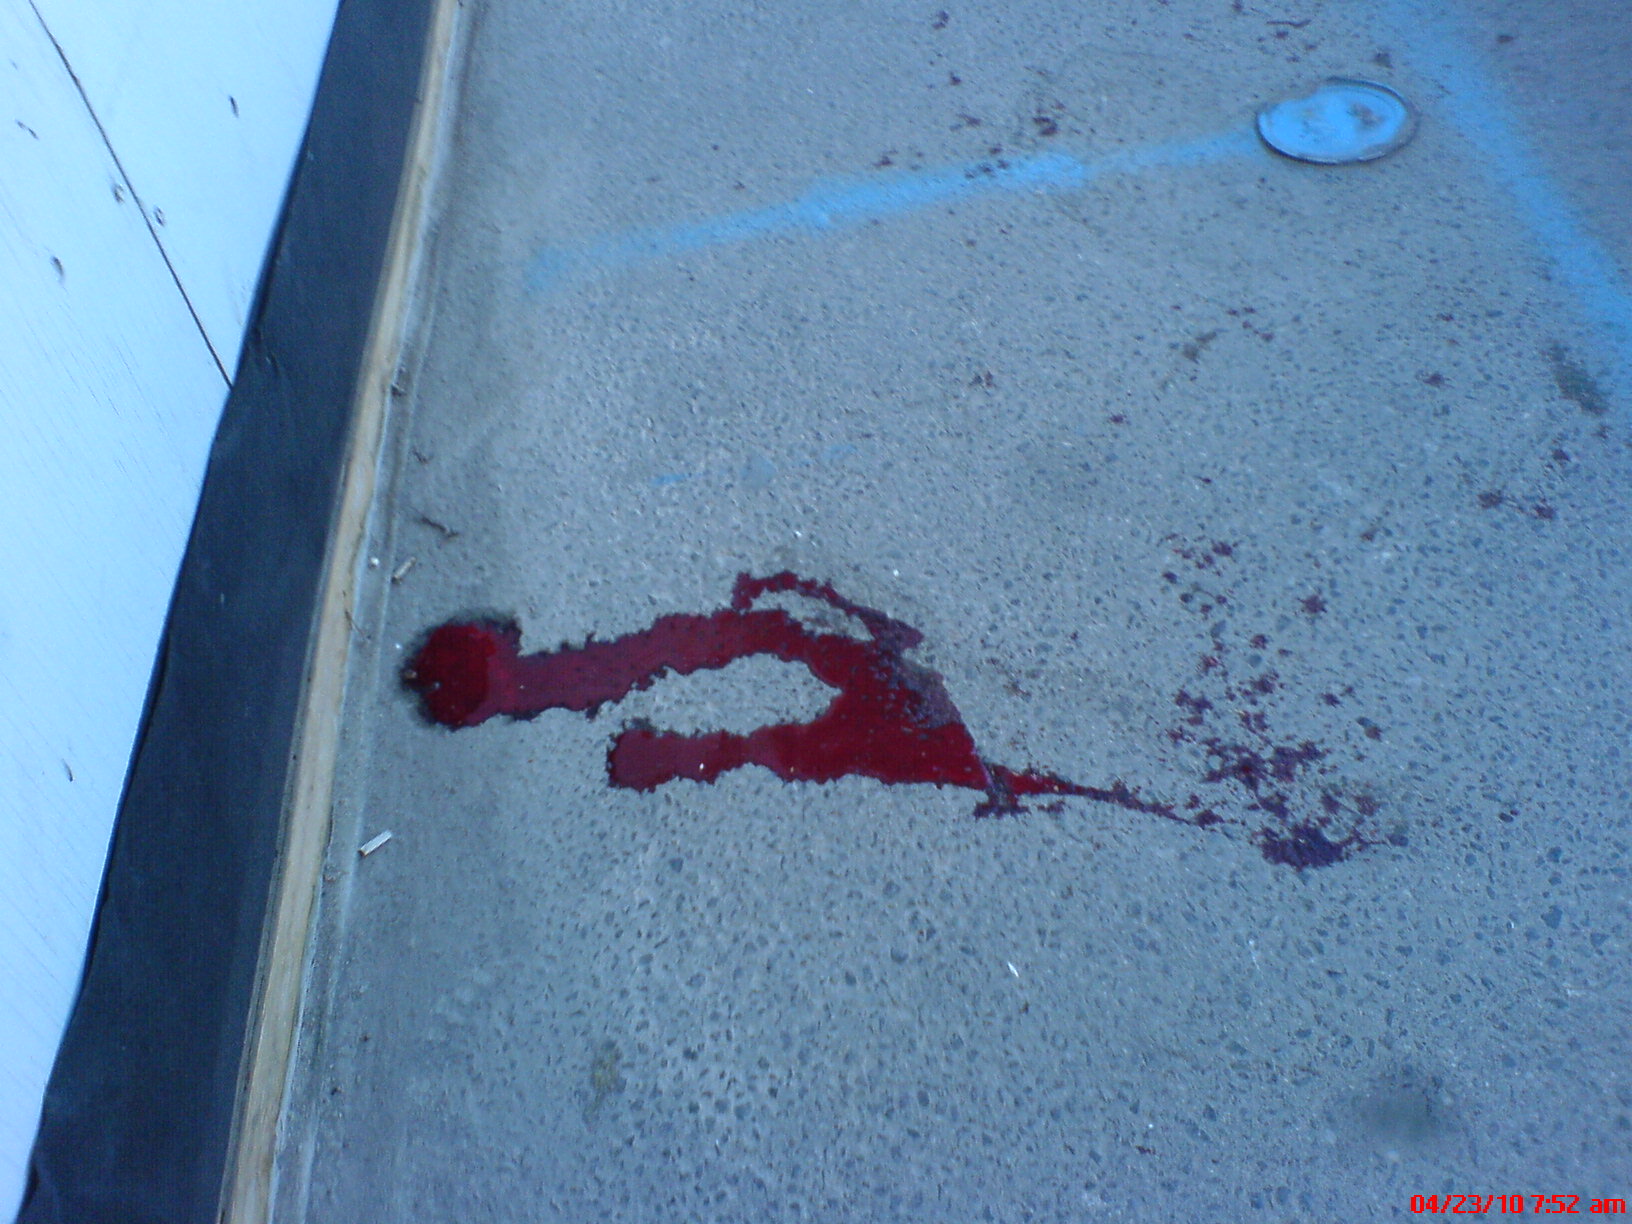 Unexplained Pool of Blood